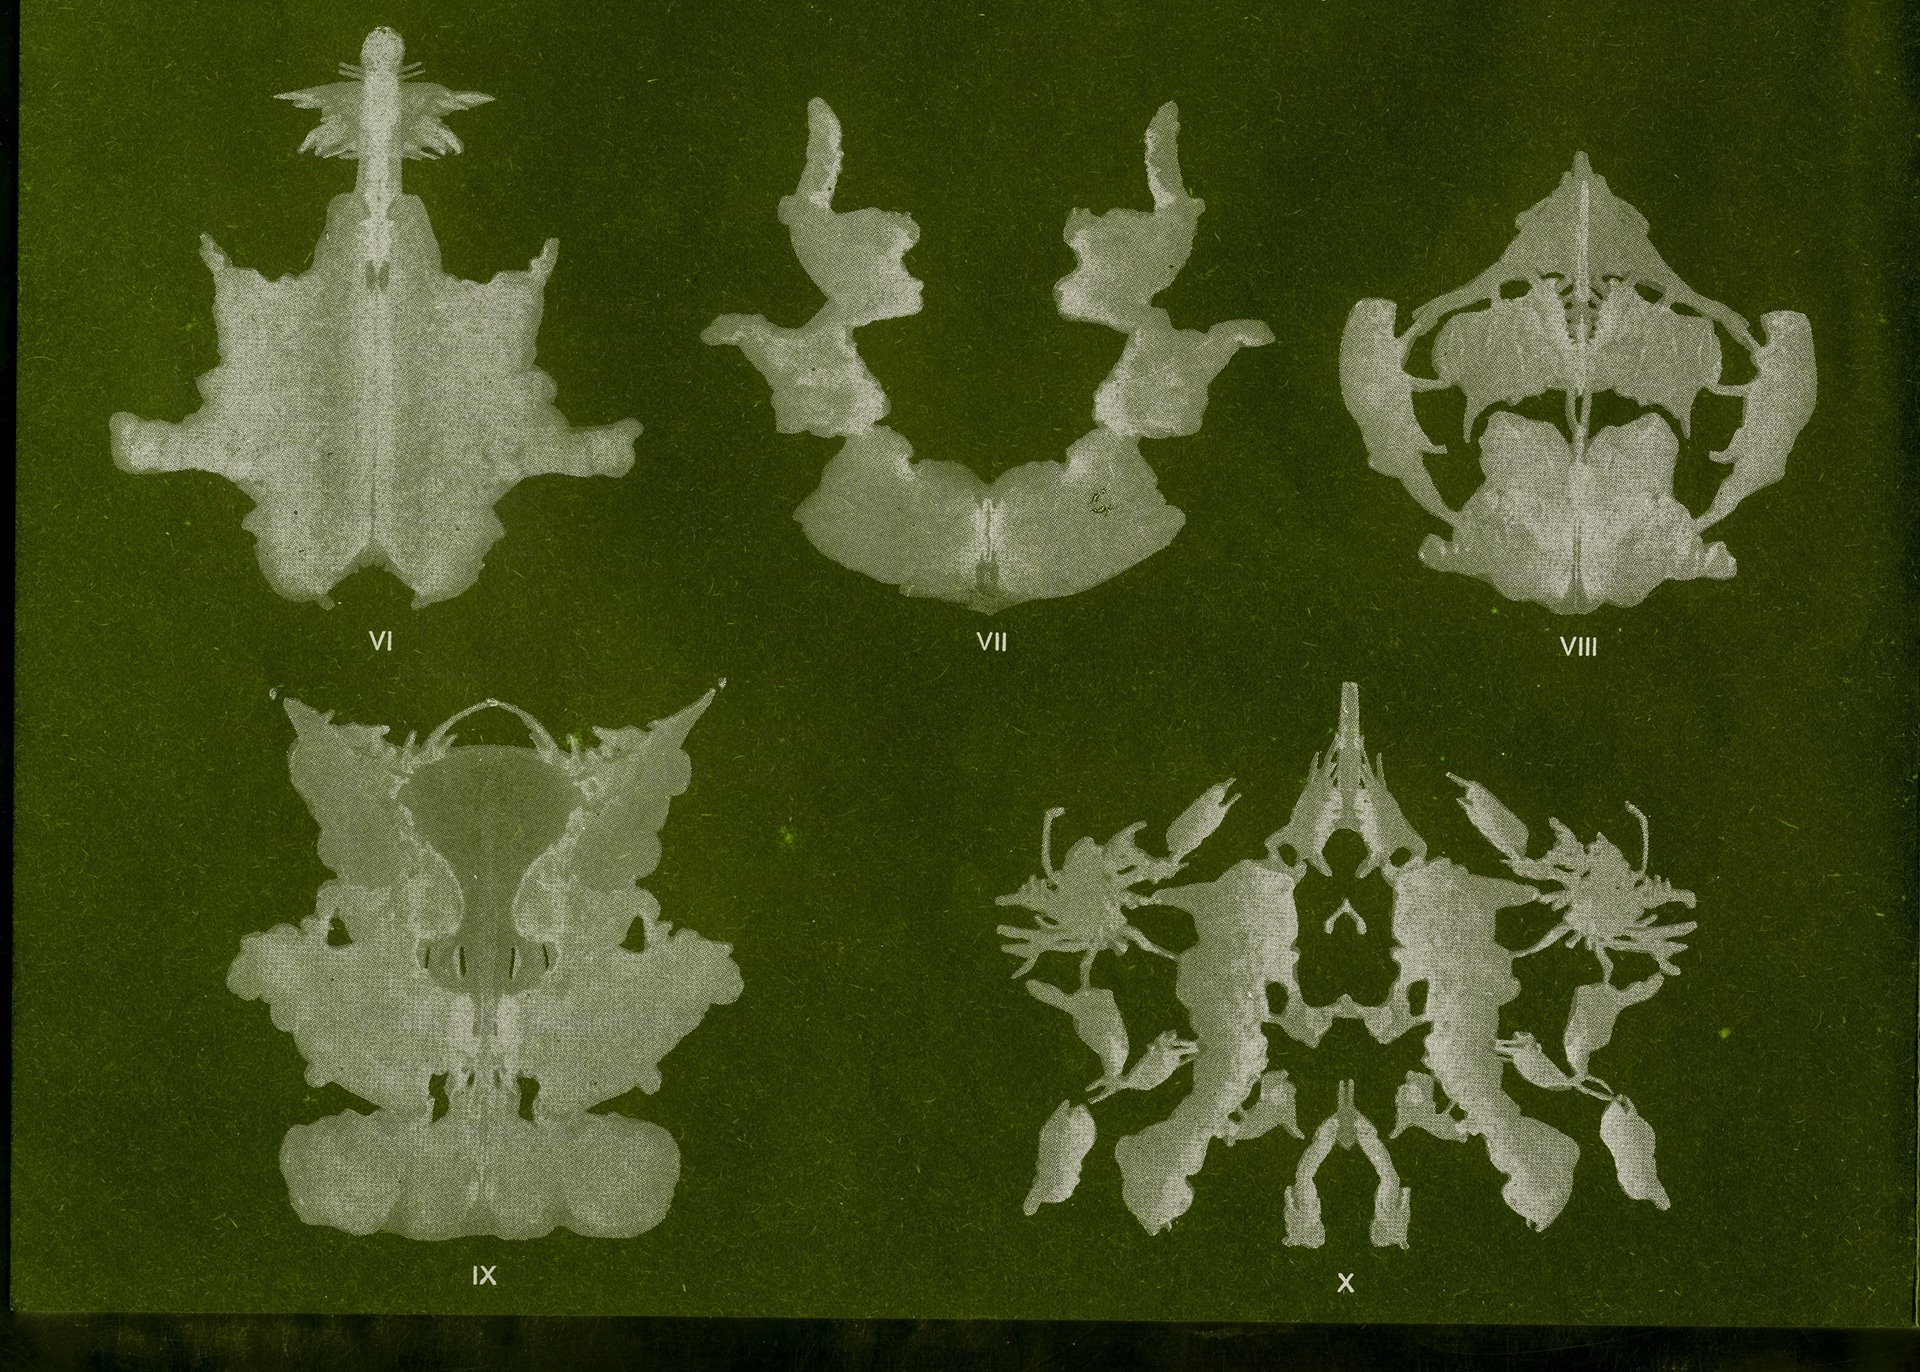 Digital representations of Rorschach inkblot tests, which were one of two &lsquo;heterosexuality tests&rsquo; that astronauts in NASA&rsquo;s Mercury, Gemini, and Apollo programs were required to take. Participants were expected to identify female anatomy in these images as evidence of their heterosexuality.&nbsp;